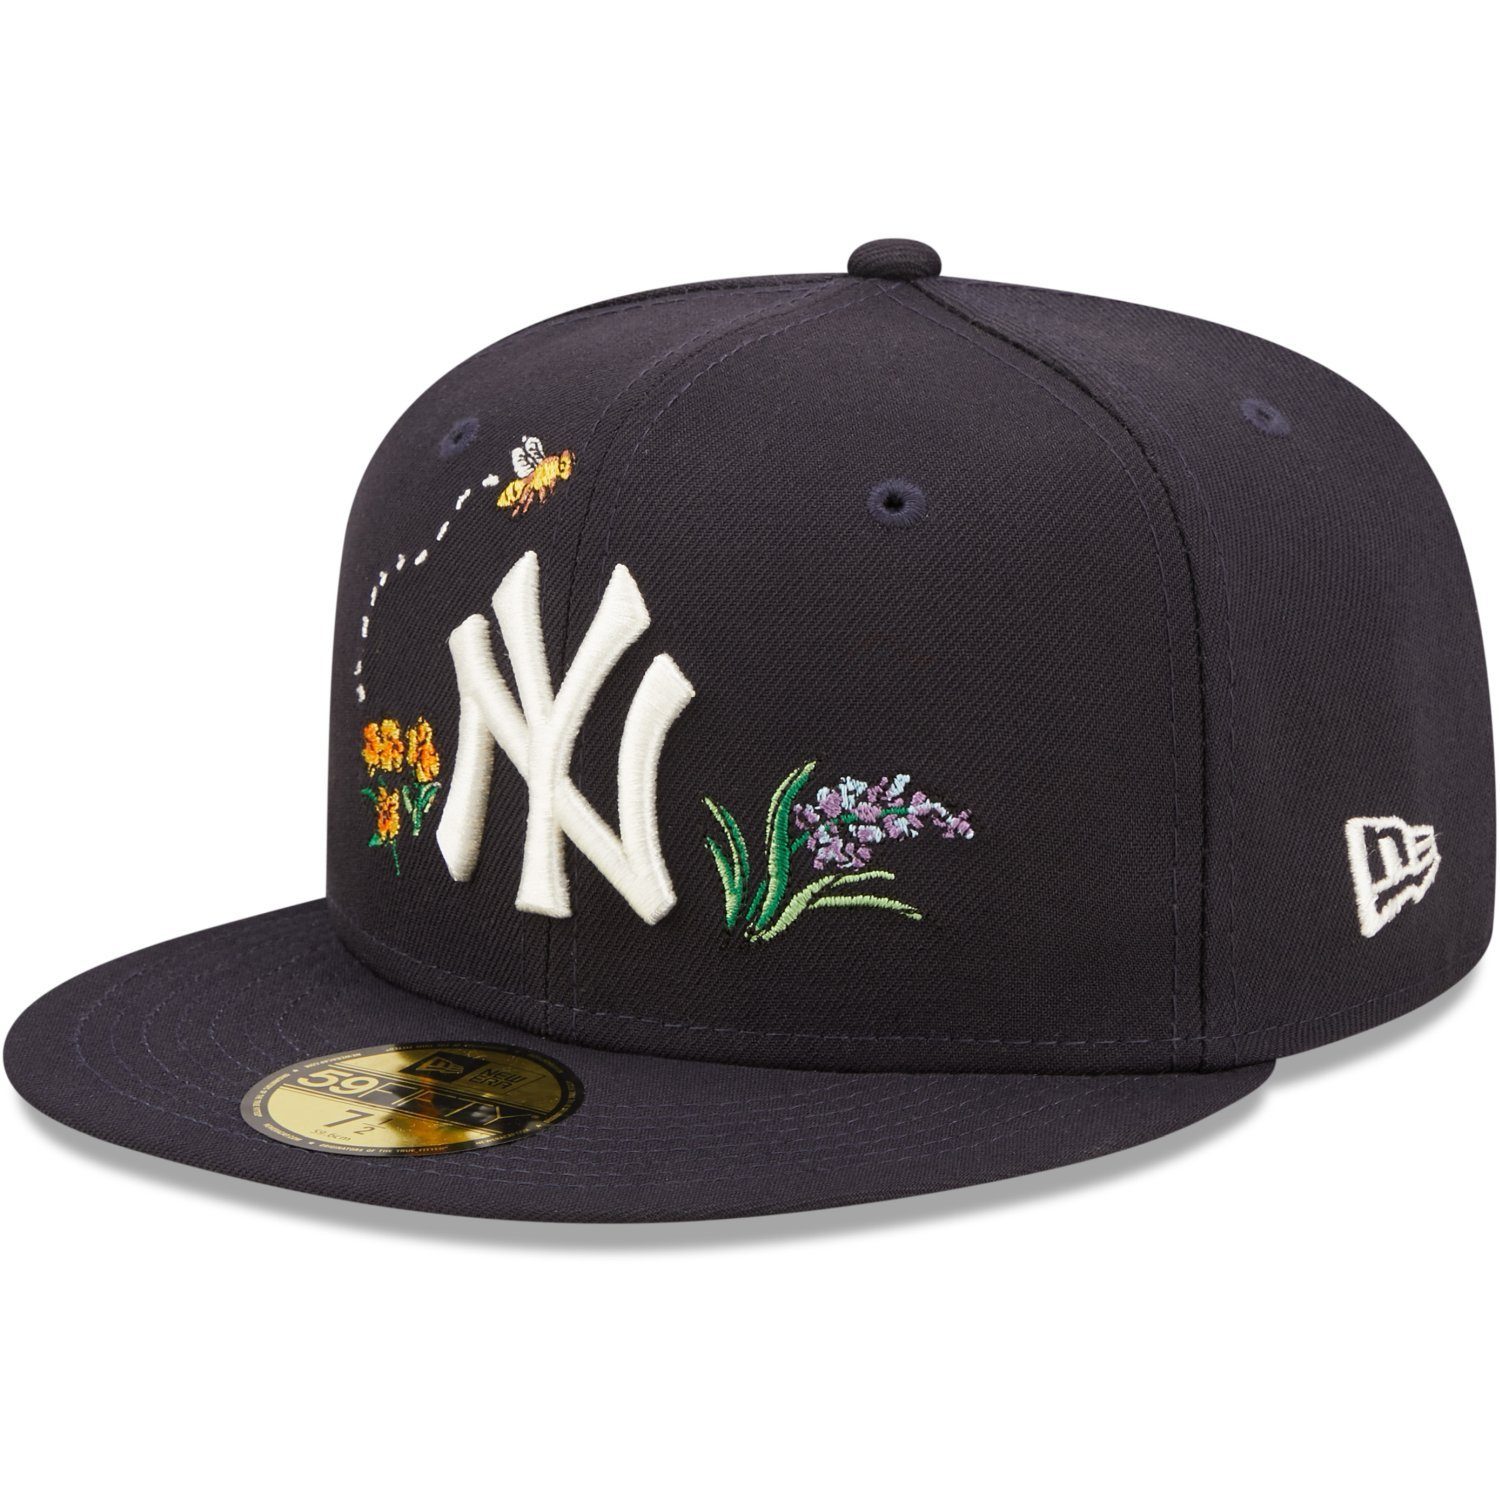 New Era Fitted Cap FLORAL York New WATER 59Fifty Yankees